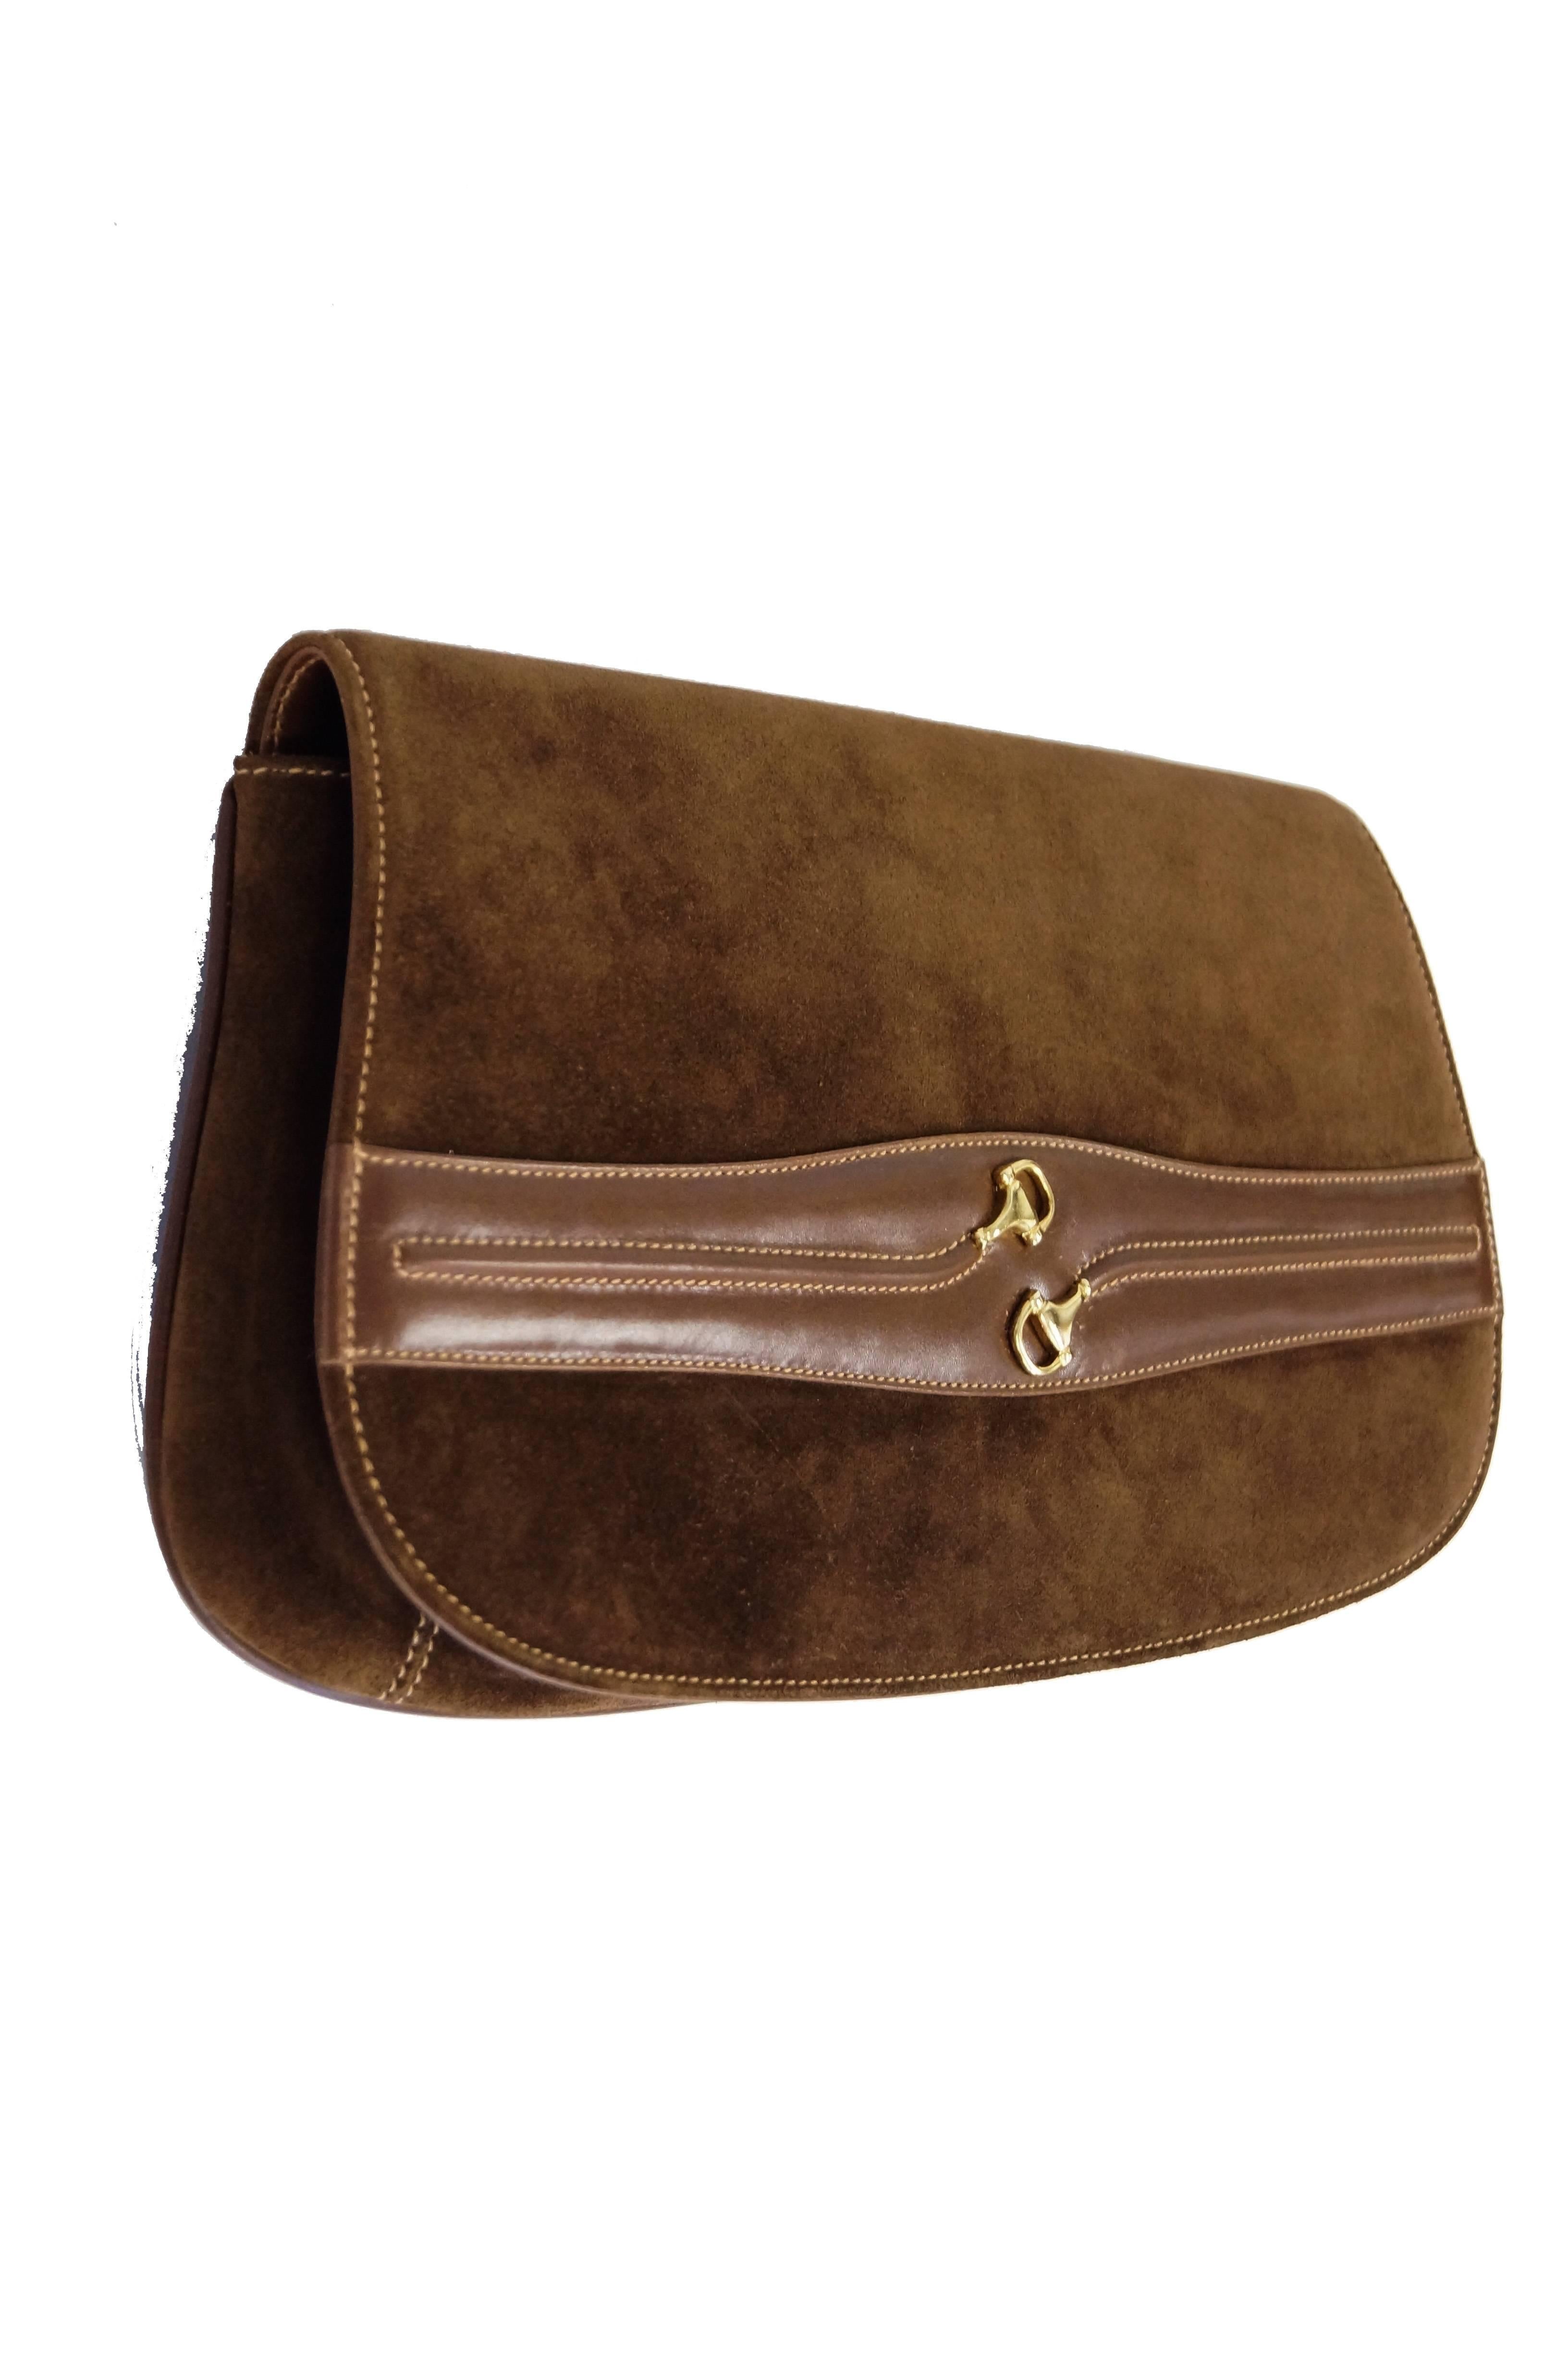 Elegant brown suede clutch by Gucci. The clutch has a rectangular trapezoidal shape with rounded edges (rather like a saddle bag) harkens back to Gucci's foundation as an equestrian leather atelier. The clutch features a strip of leather across the